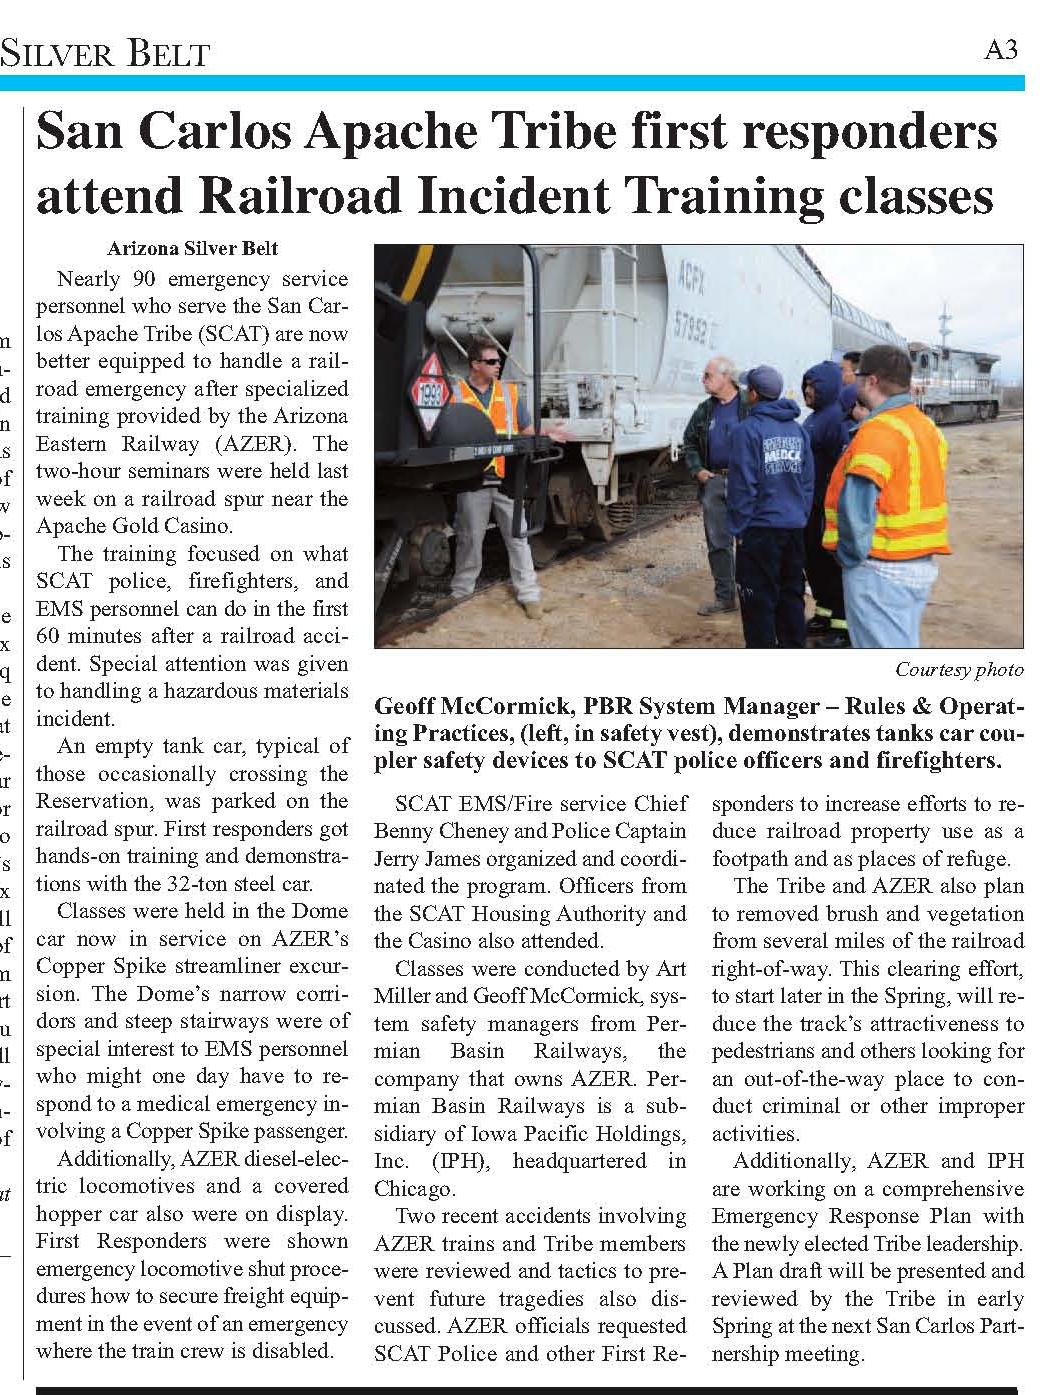 Art Miller, working through railroad employers and RTMS, has conducted dozens of railroad safety training programs for production crews, law enforcement agencies, fire departments and other First Responders.